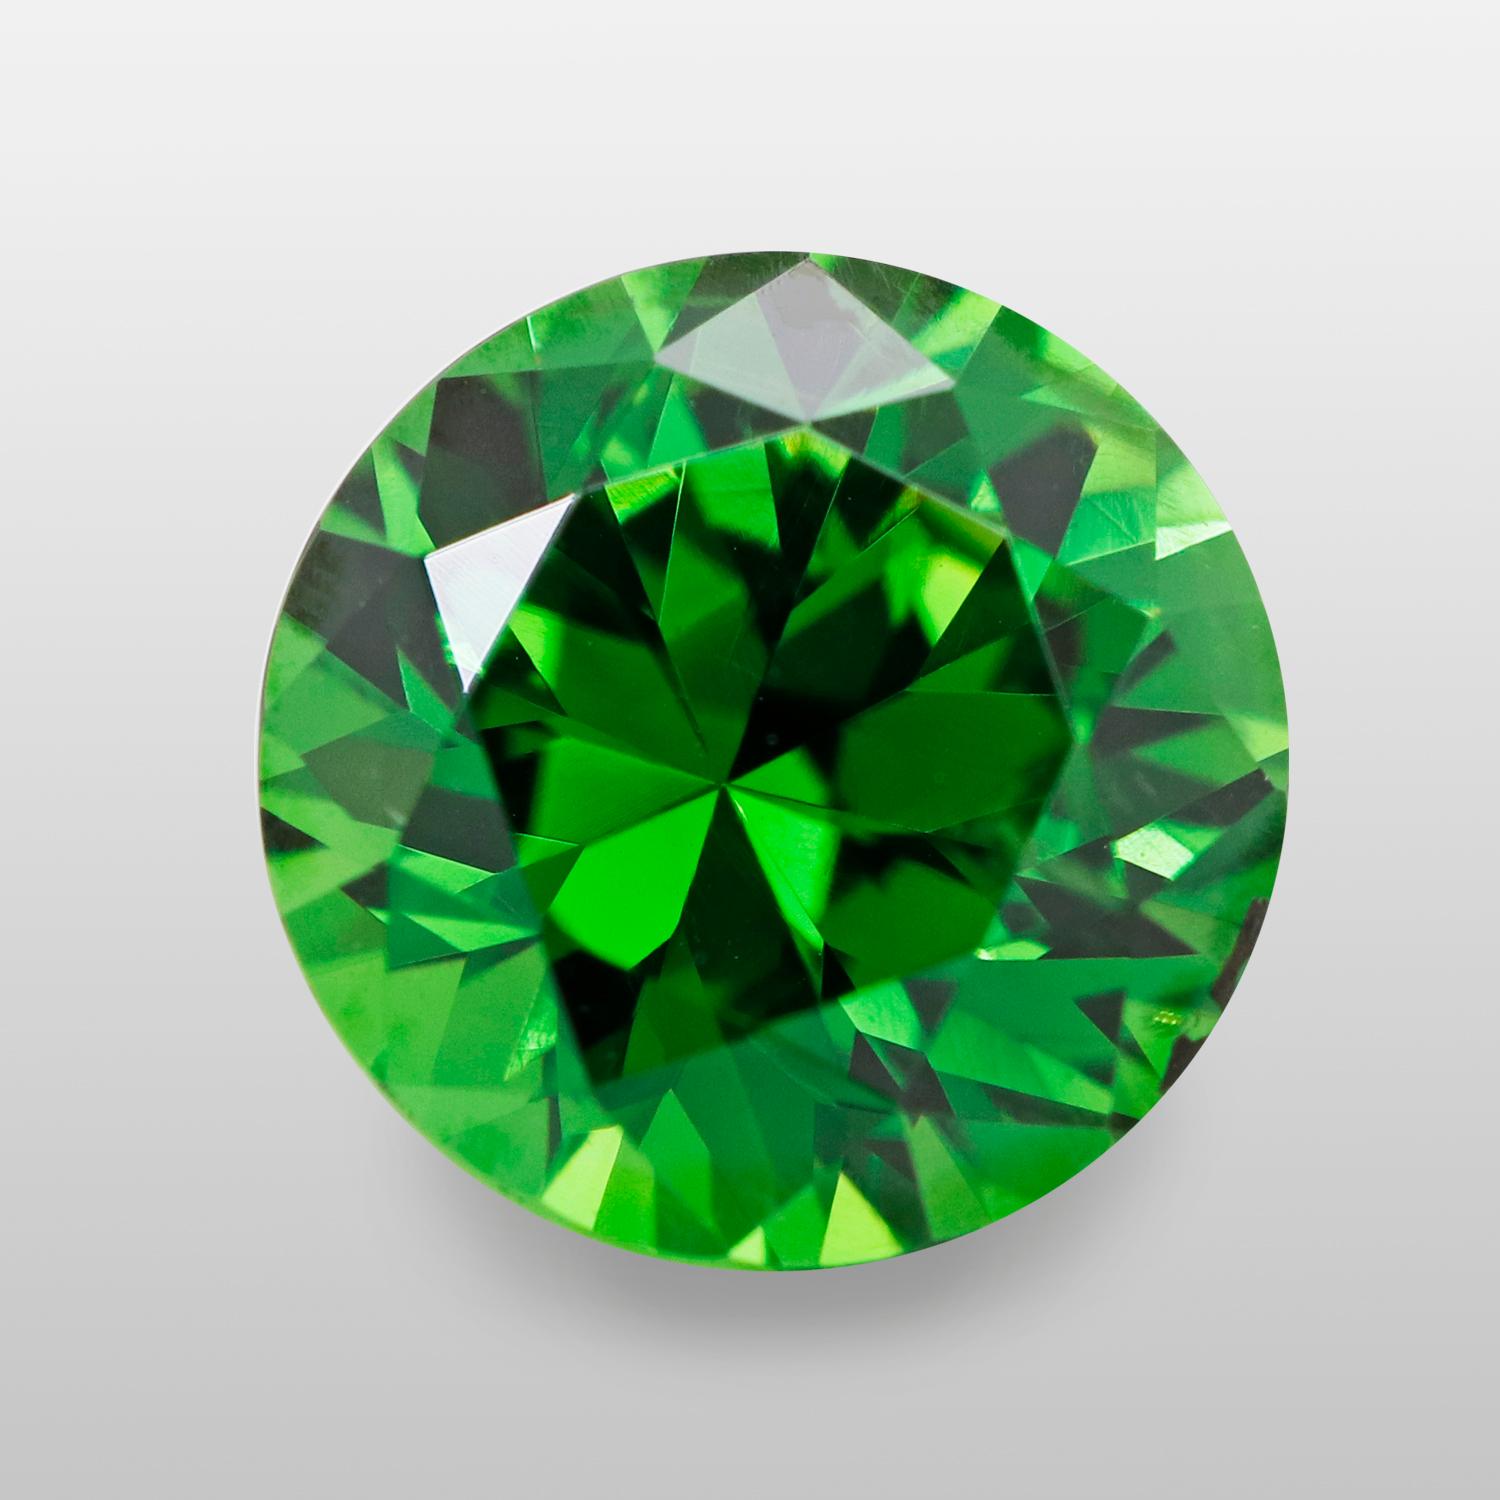 Ural Mountains of Russia is the most important and consistent source of the rarest variety of Garnets - Demantoid.  
The stones from this region are famous for their vivid green hue, high dispersion and characteristic horsetail inclusion. 